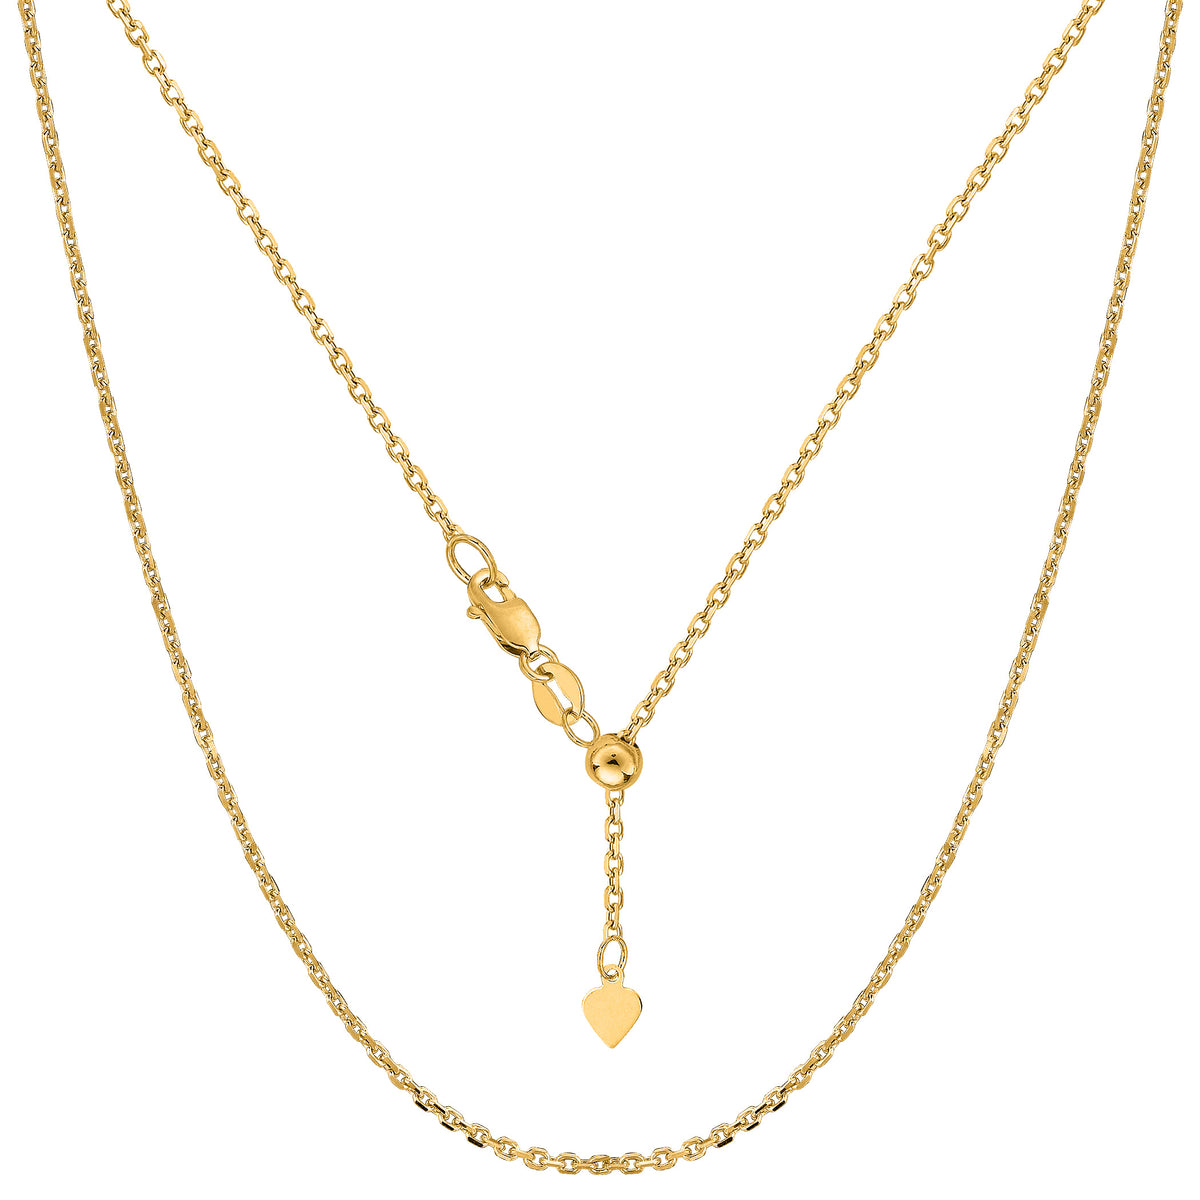 10k Yellow Gold Adjustable Cable Link Chain Necklace, 0.9mm, 22"